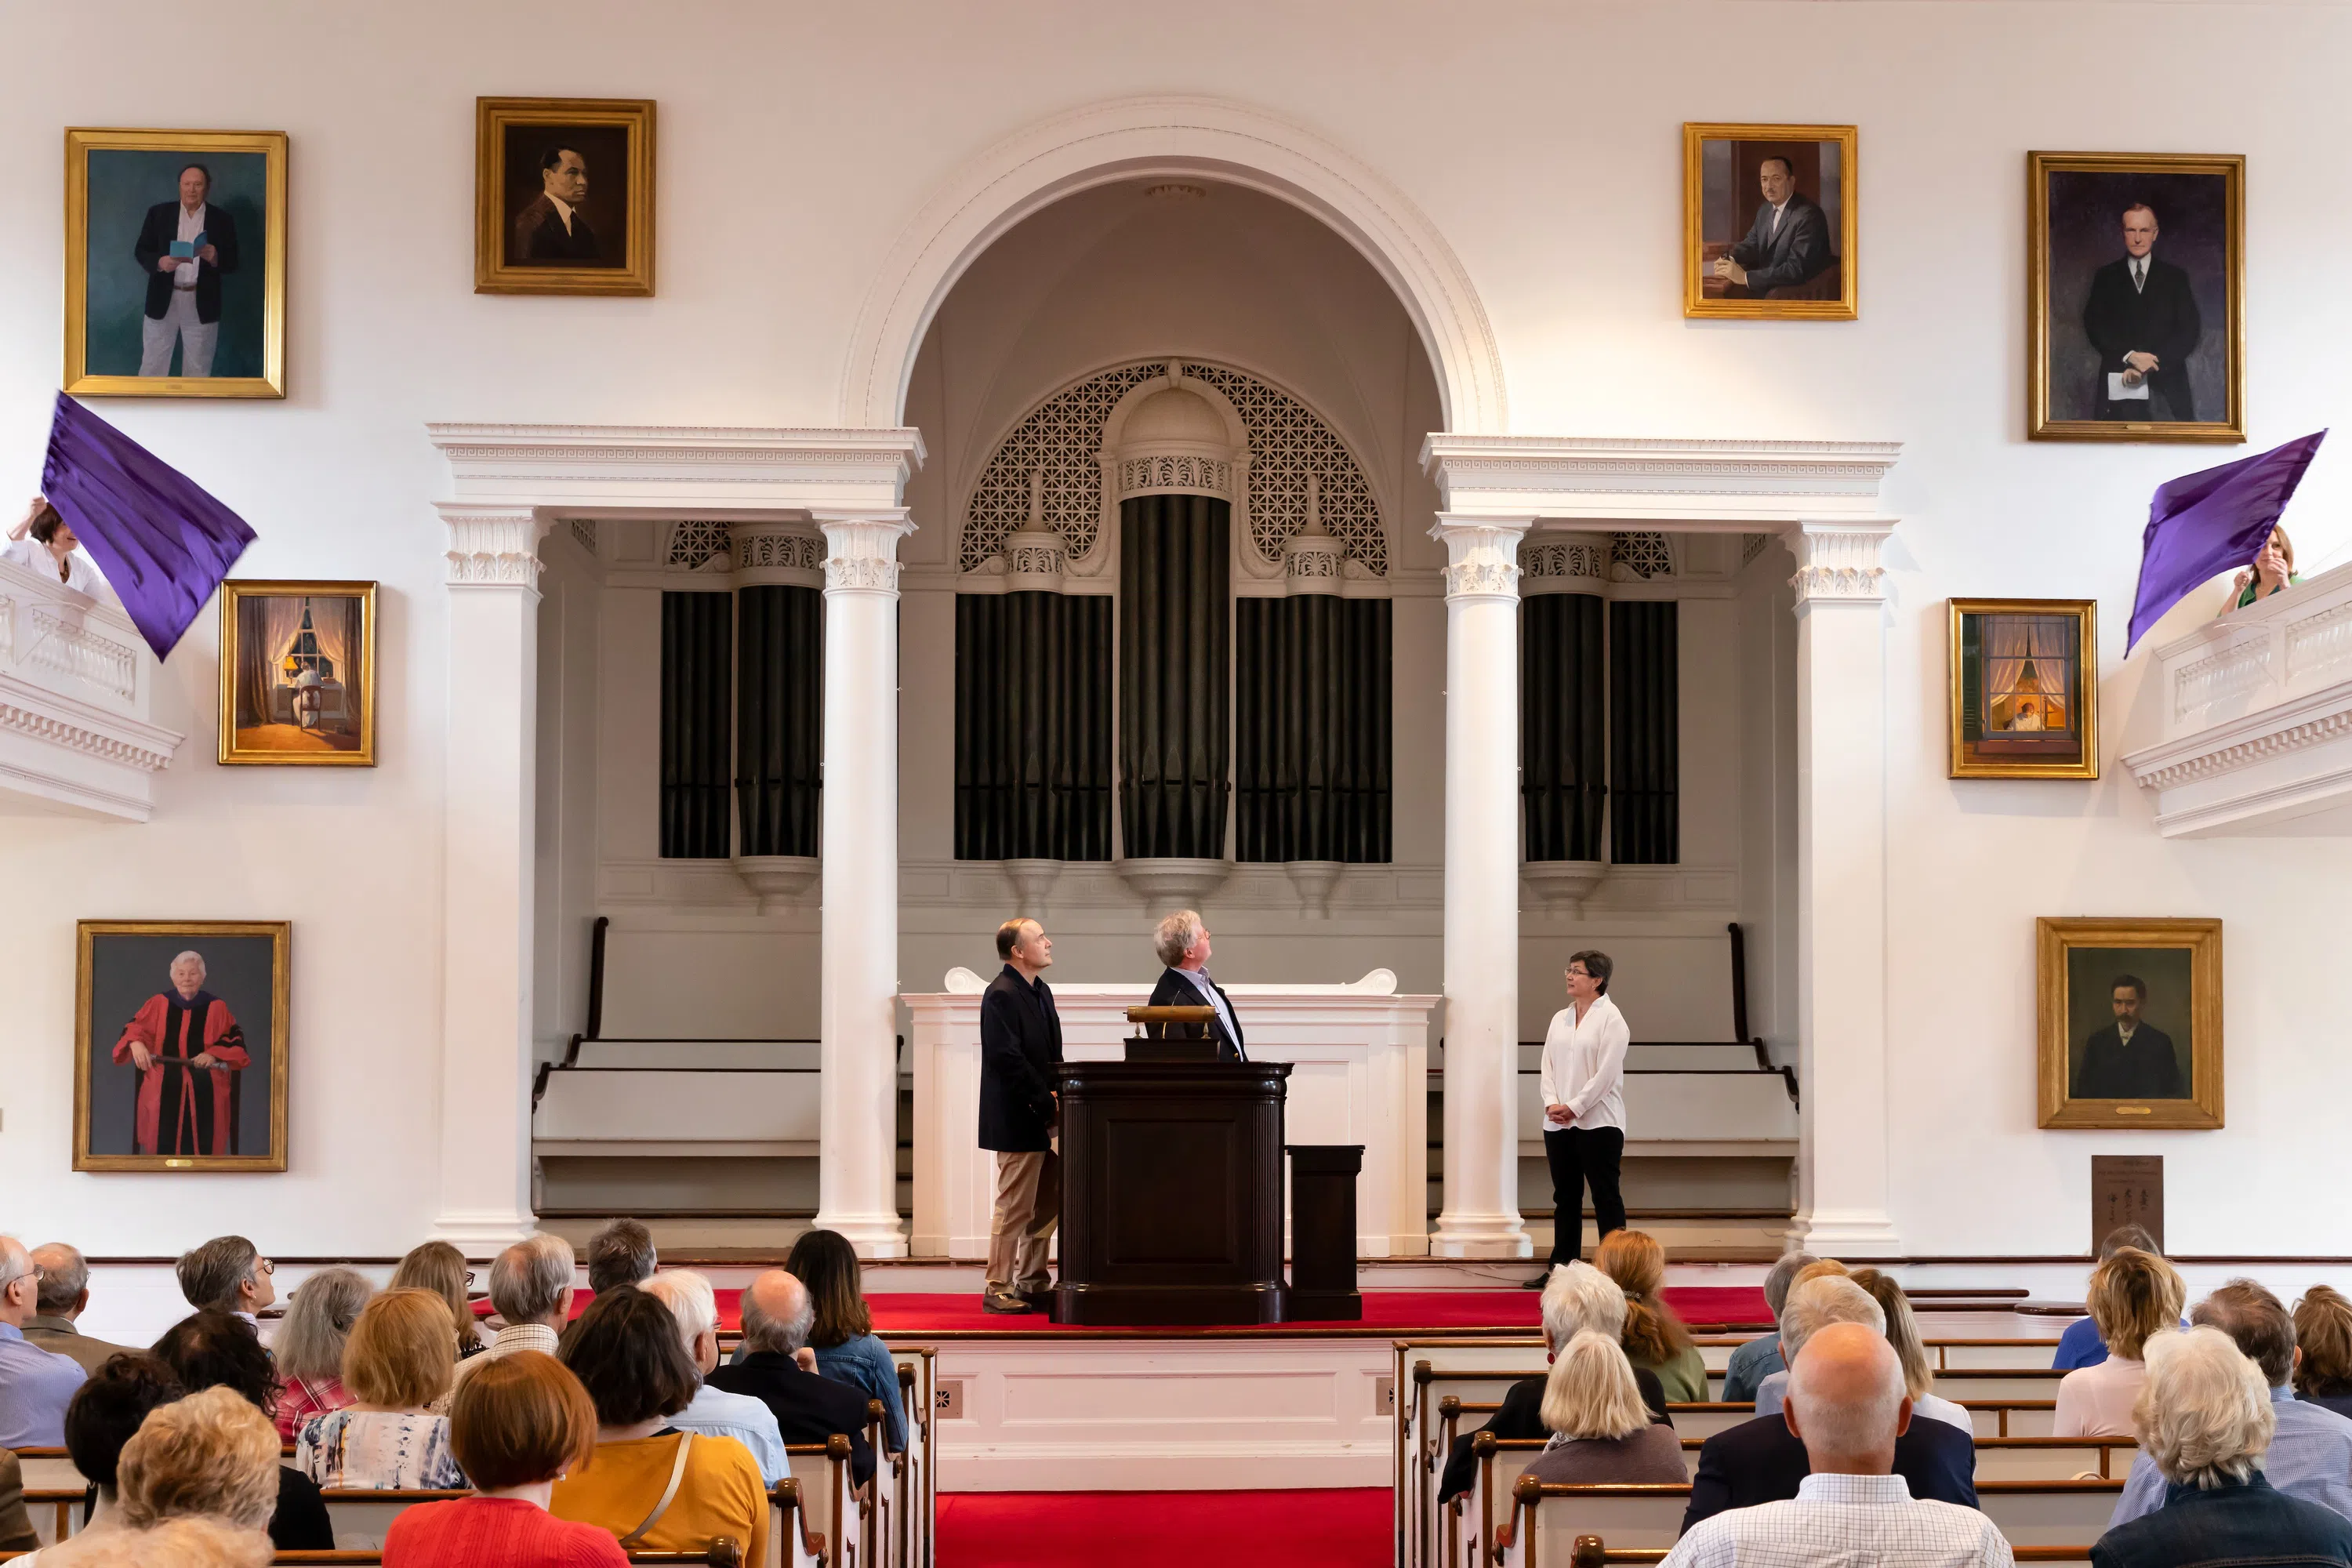 Interior shot of Johnson Chapel with two men on stage and crowd looking on as paintings on wall are unveiled.